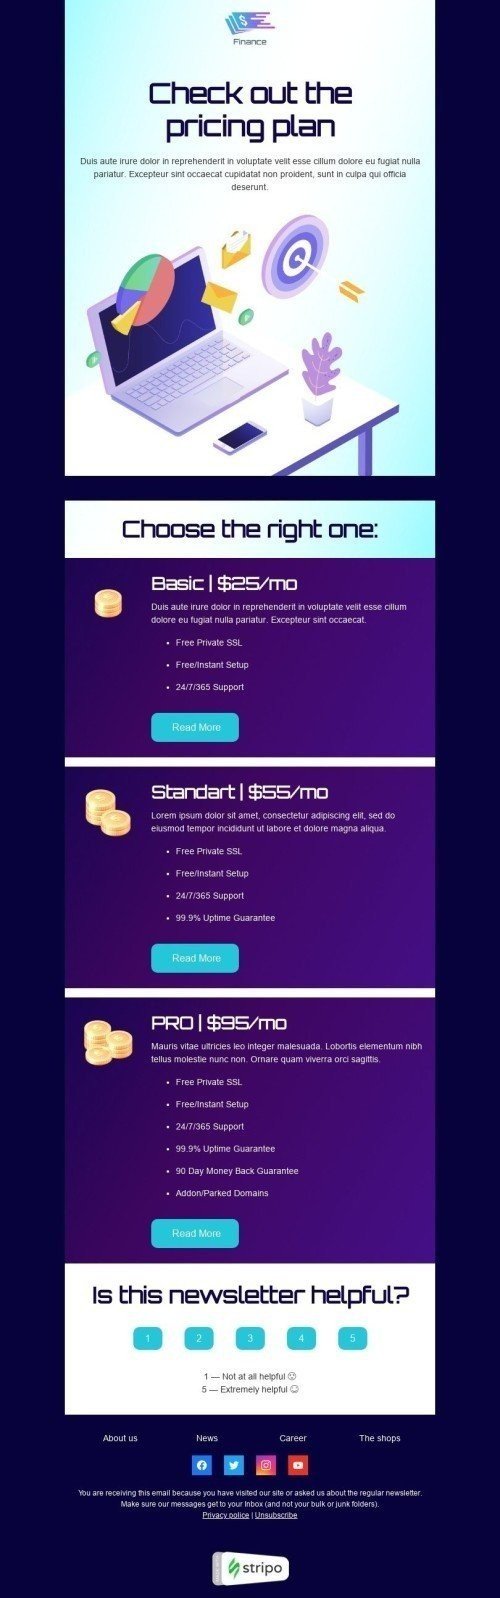 Price List Email Template "Finance price list" for Finance industry mobile view